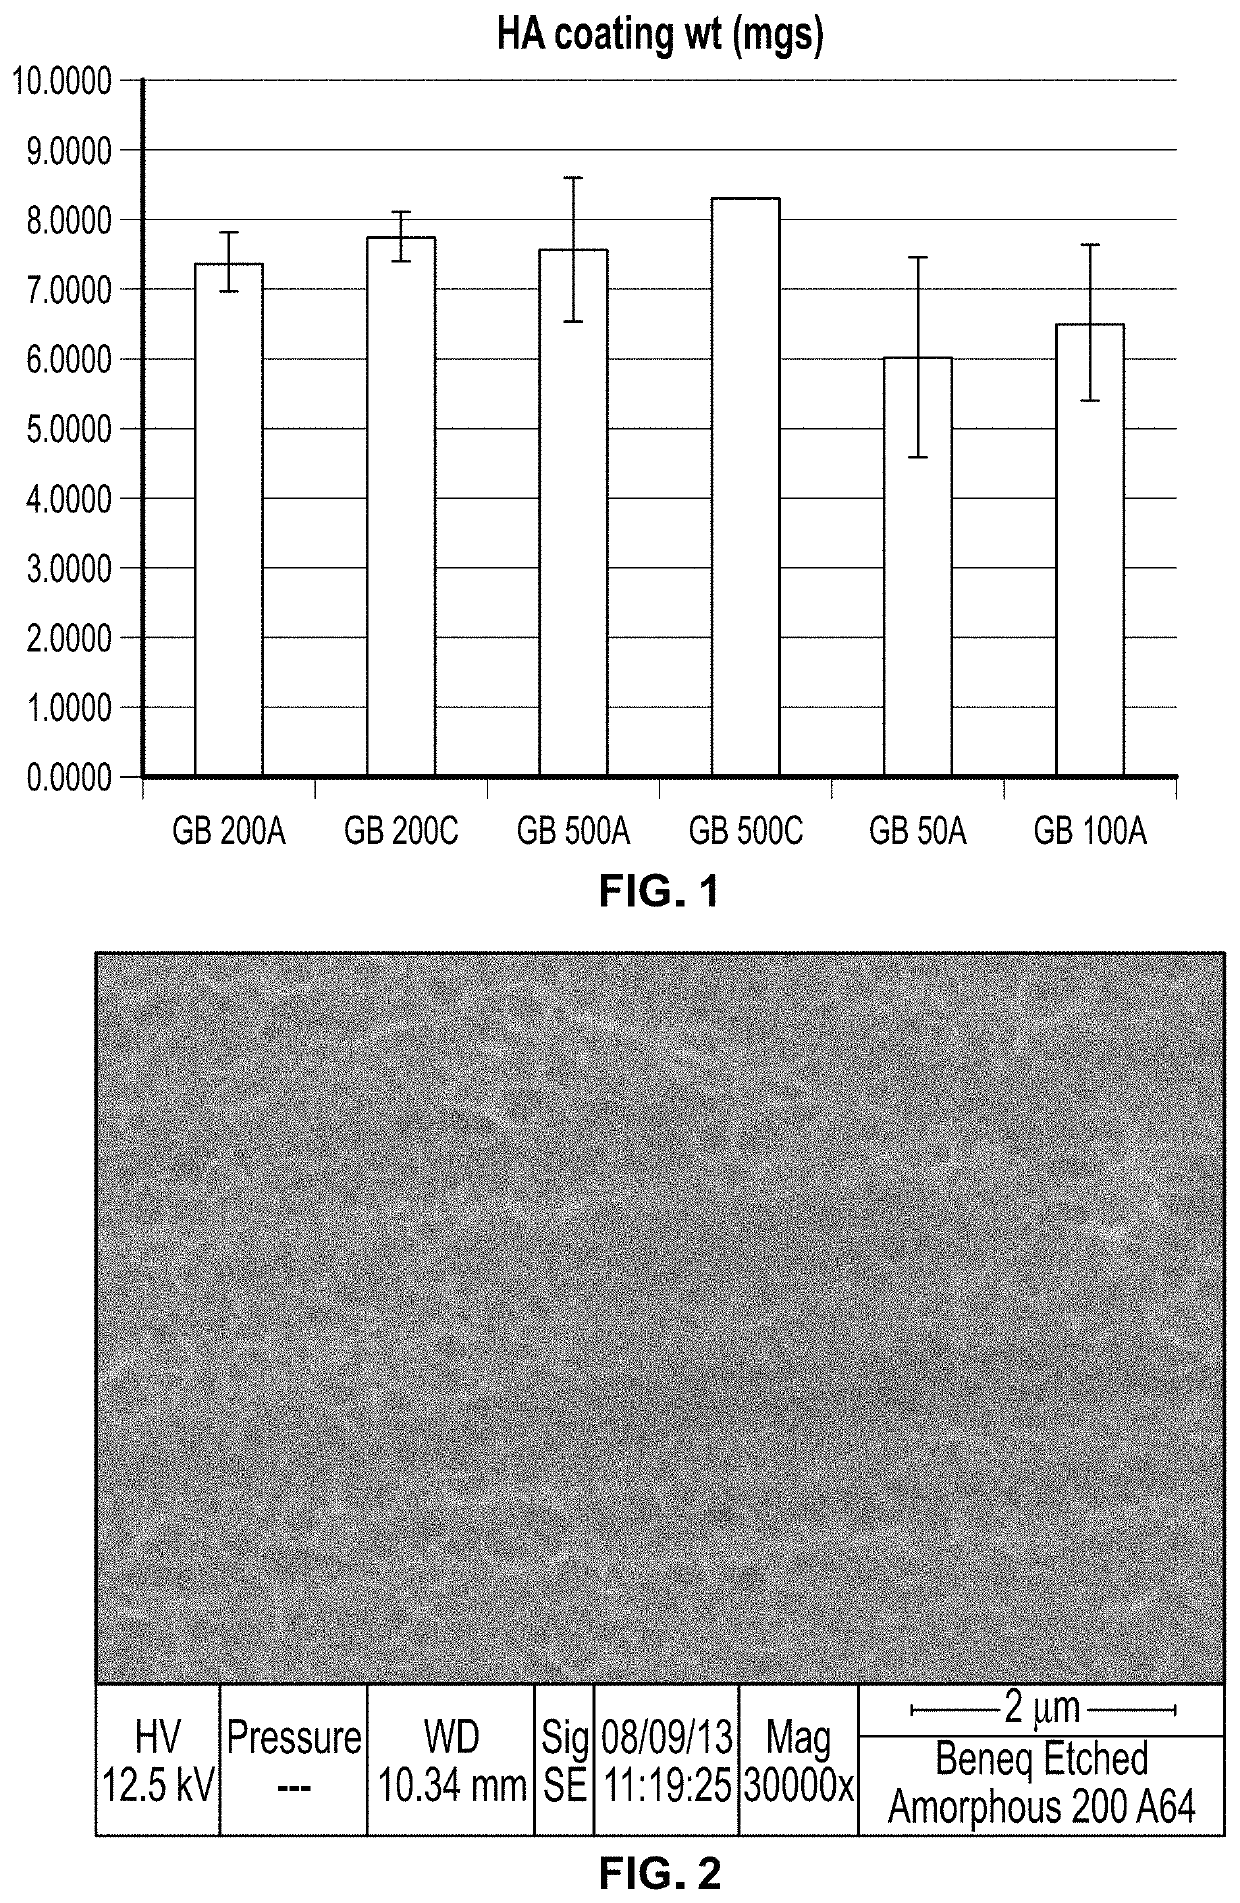 Orthopedic implant having a crystalline calcium phosphate coating and methods for making the same